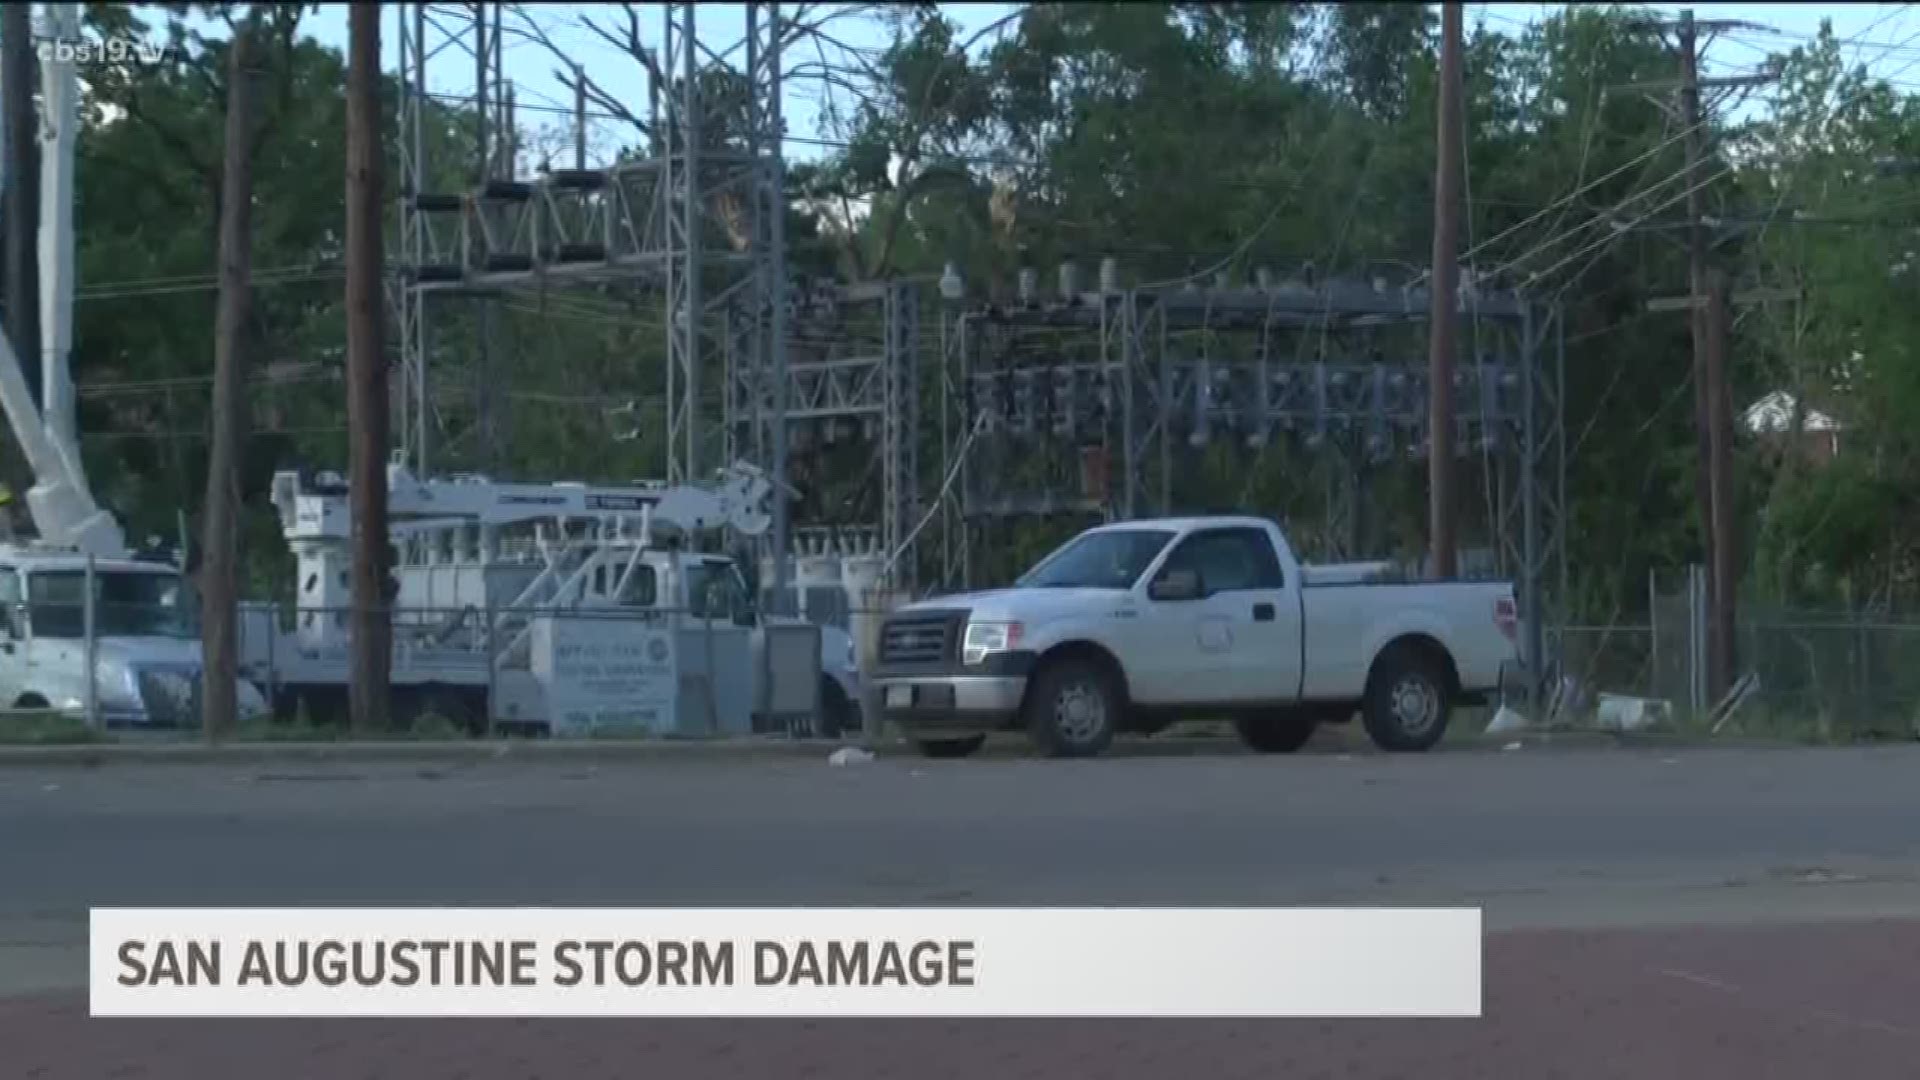 An EF-2 tornado struck San Augustine early Thursday morning causing major damage through the small town. Fortunately, there were no reports of injuries.